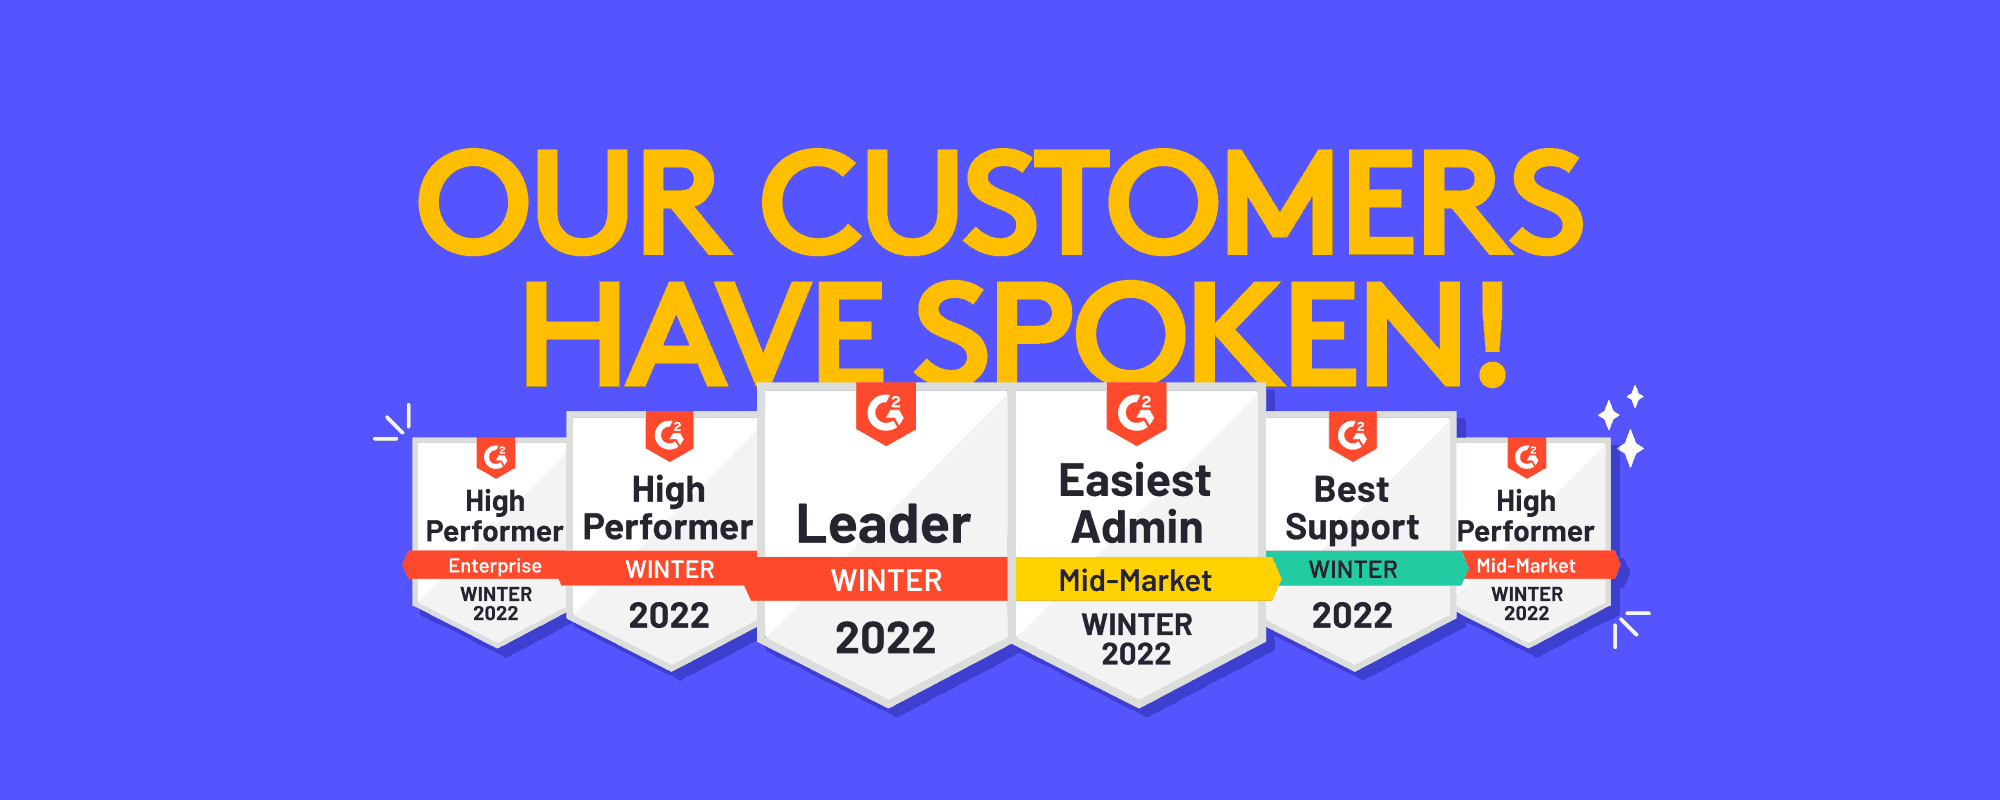 6 award banners from G2 with text "Our customers have spoken"